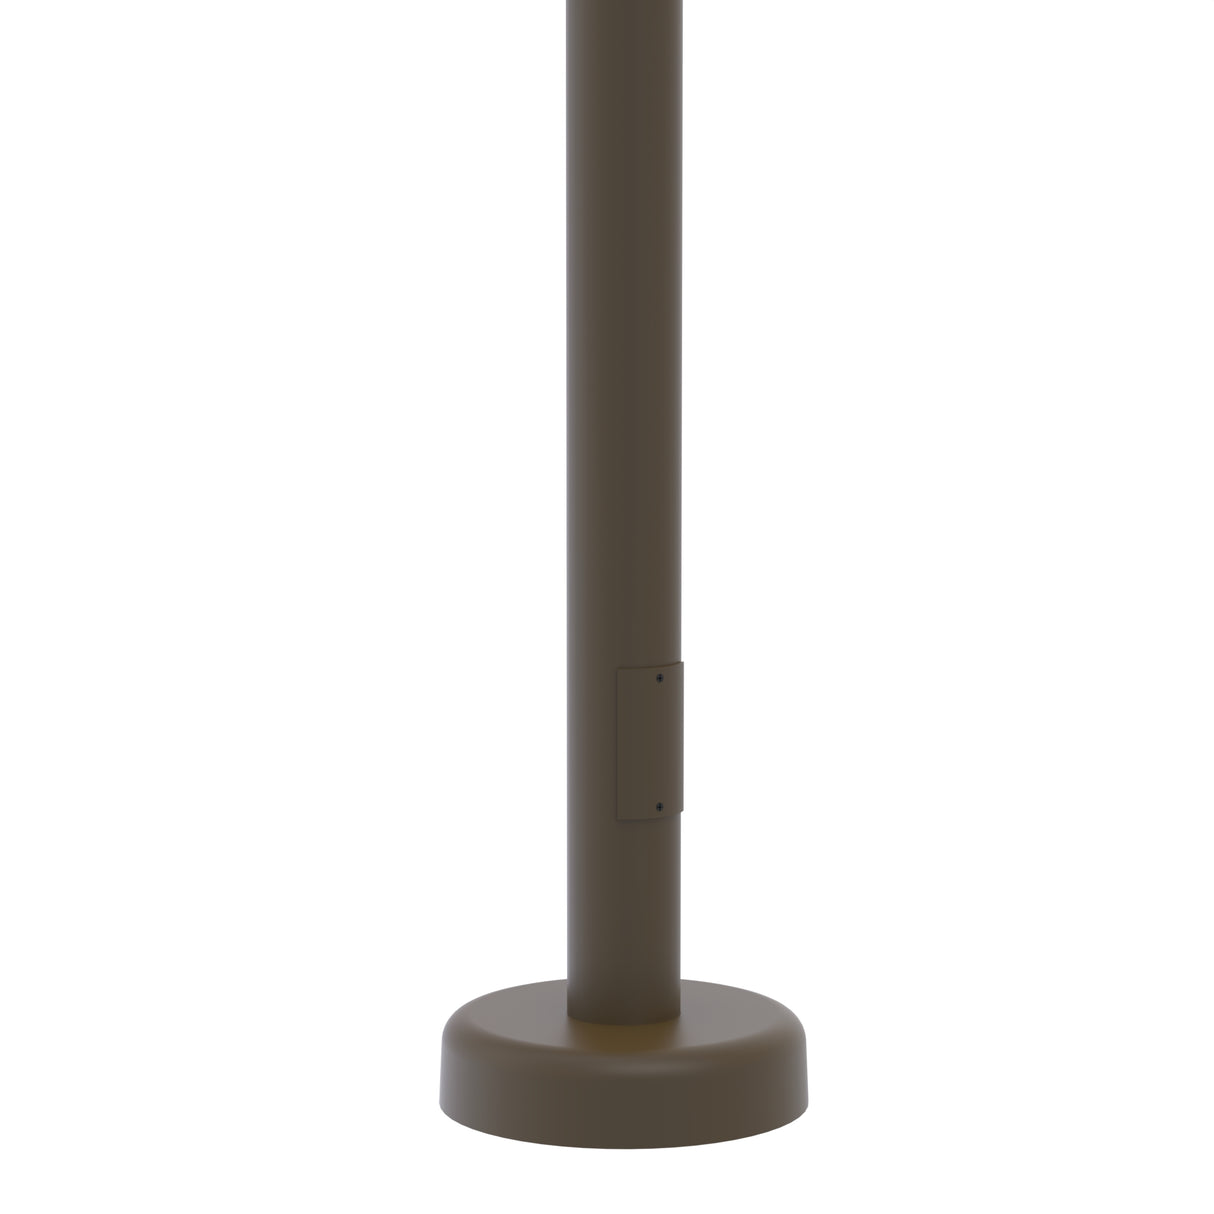 16' Tall x 5.0" OD x 0.156" Thick, Round Straight Aluminum, Hinged Anchor Base Light Pole